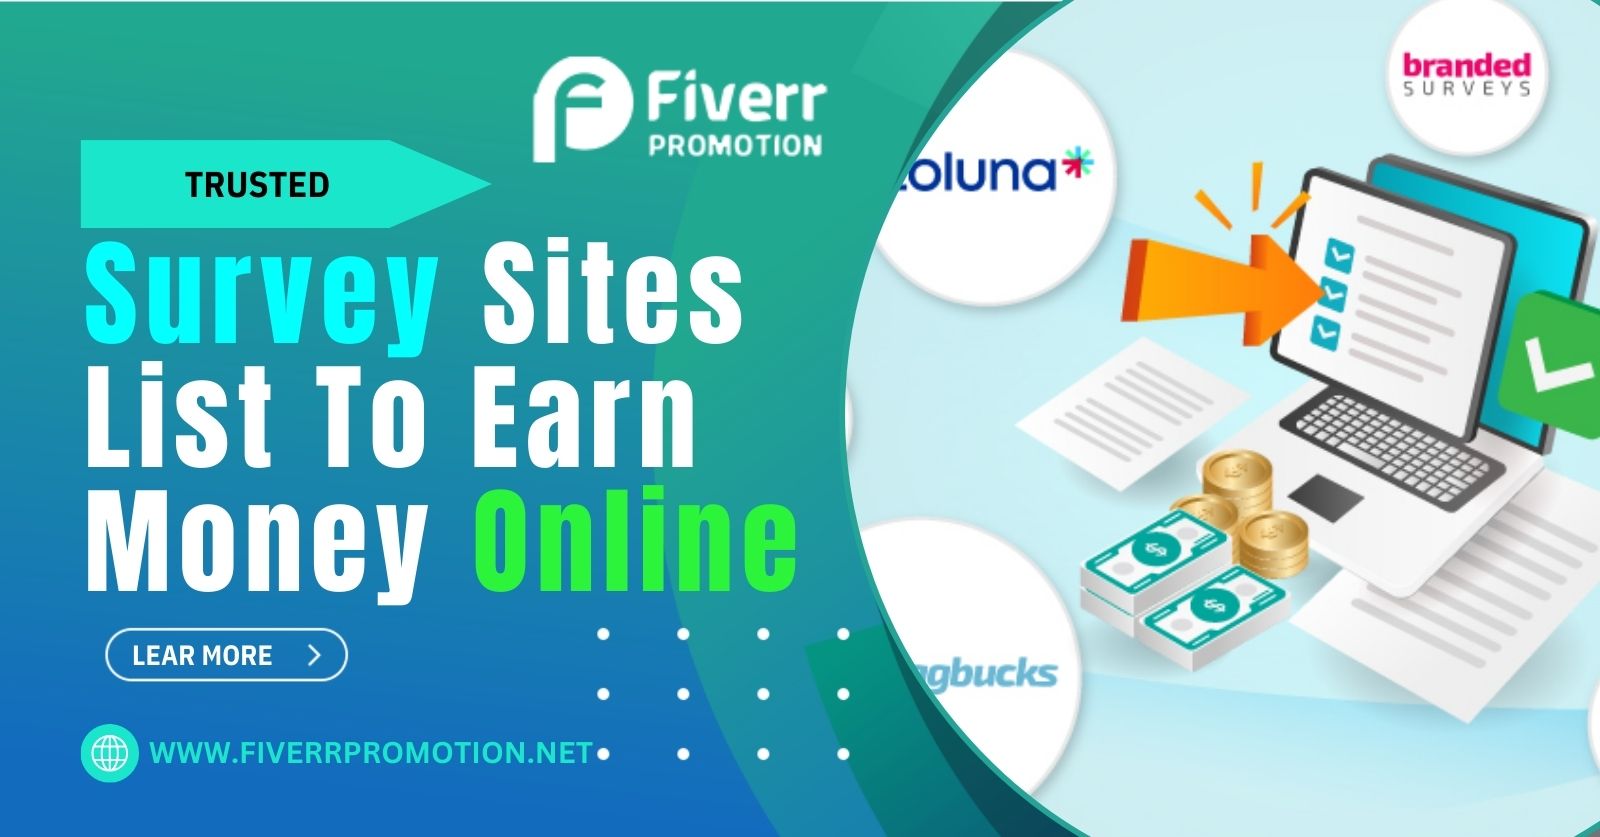 Trusted survey sites list to earn money online